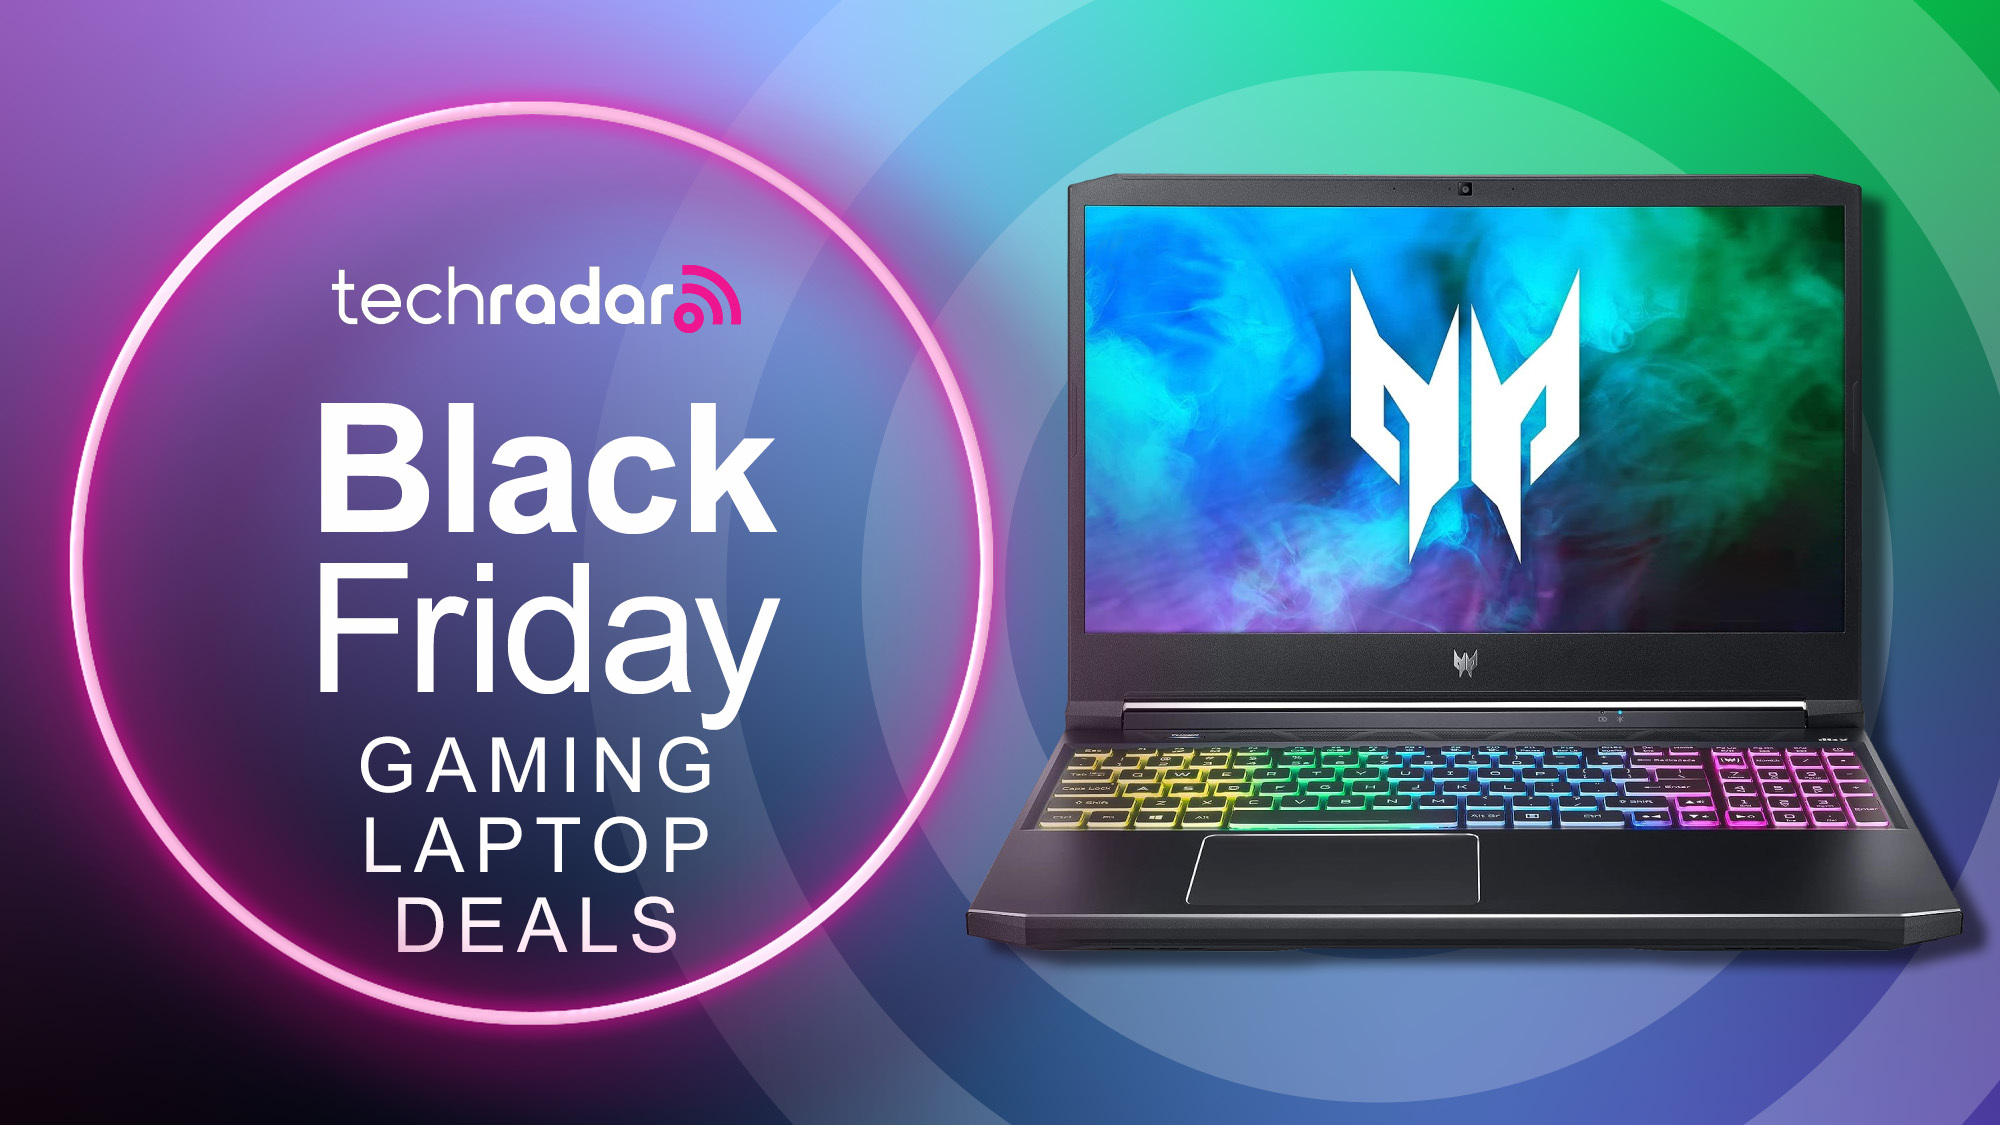 Black Friday 2021 best deals for PC gaming hardware